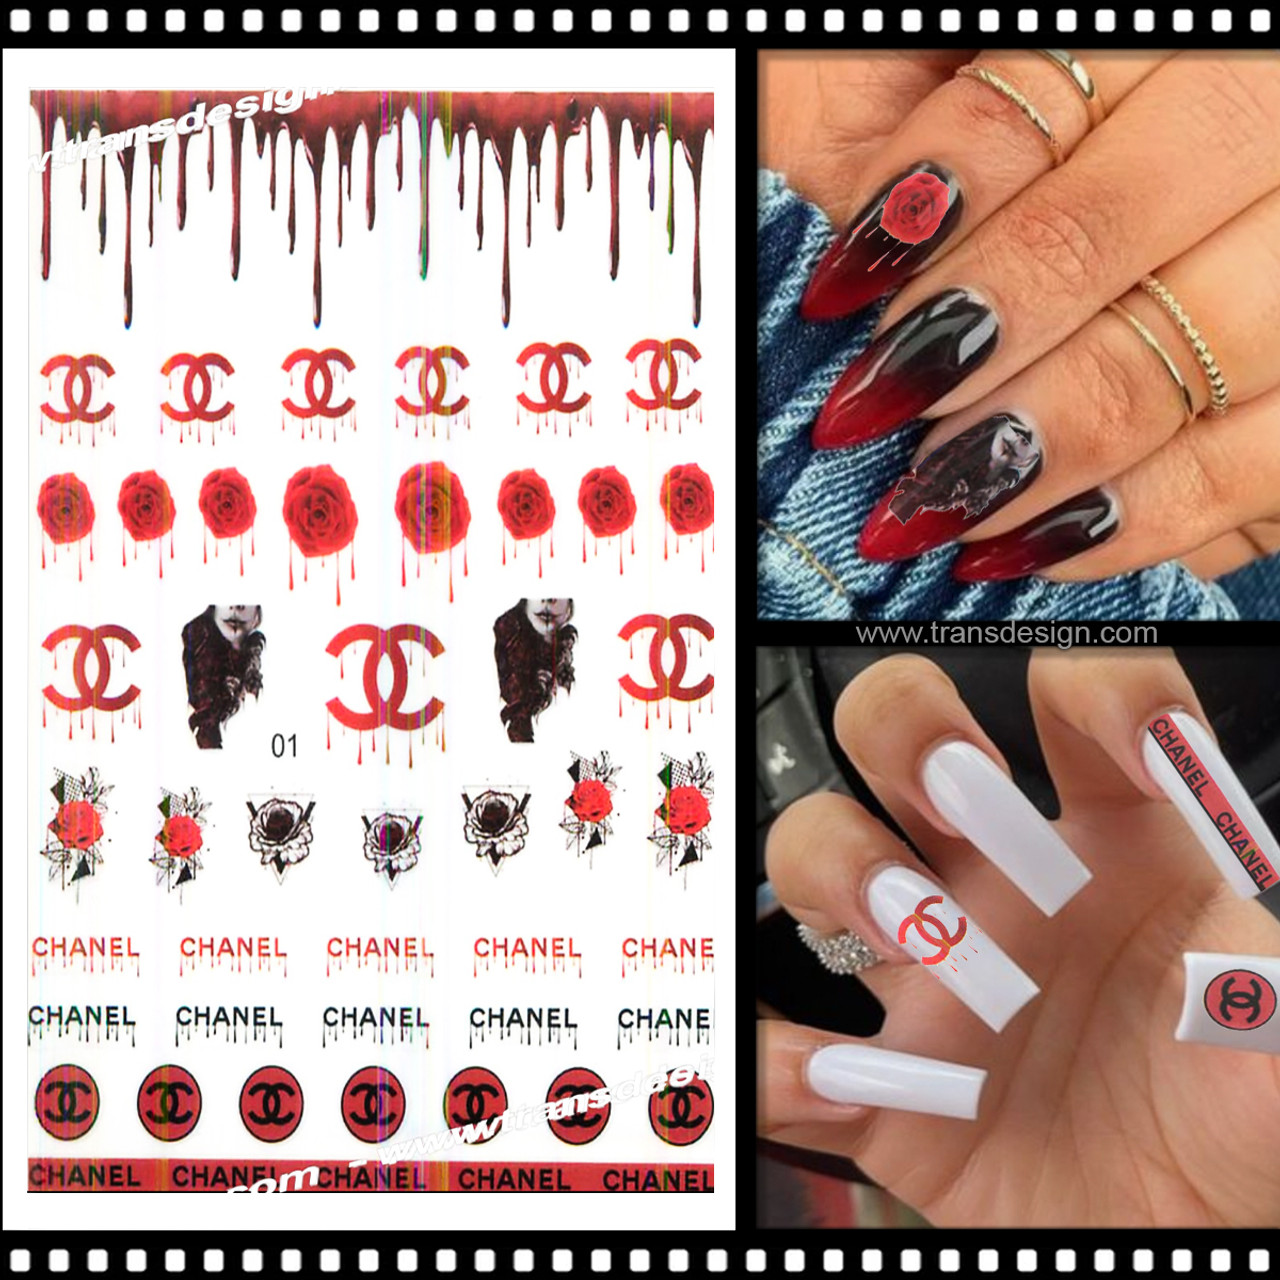 NAIL STICKER Brands Name Pink CHANEL #MS-C011